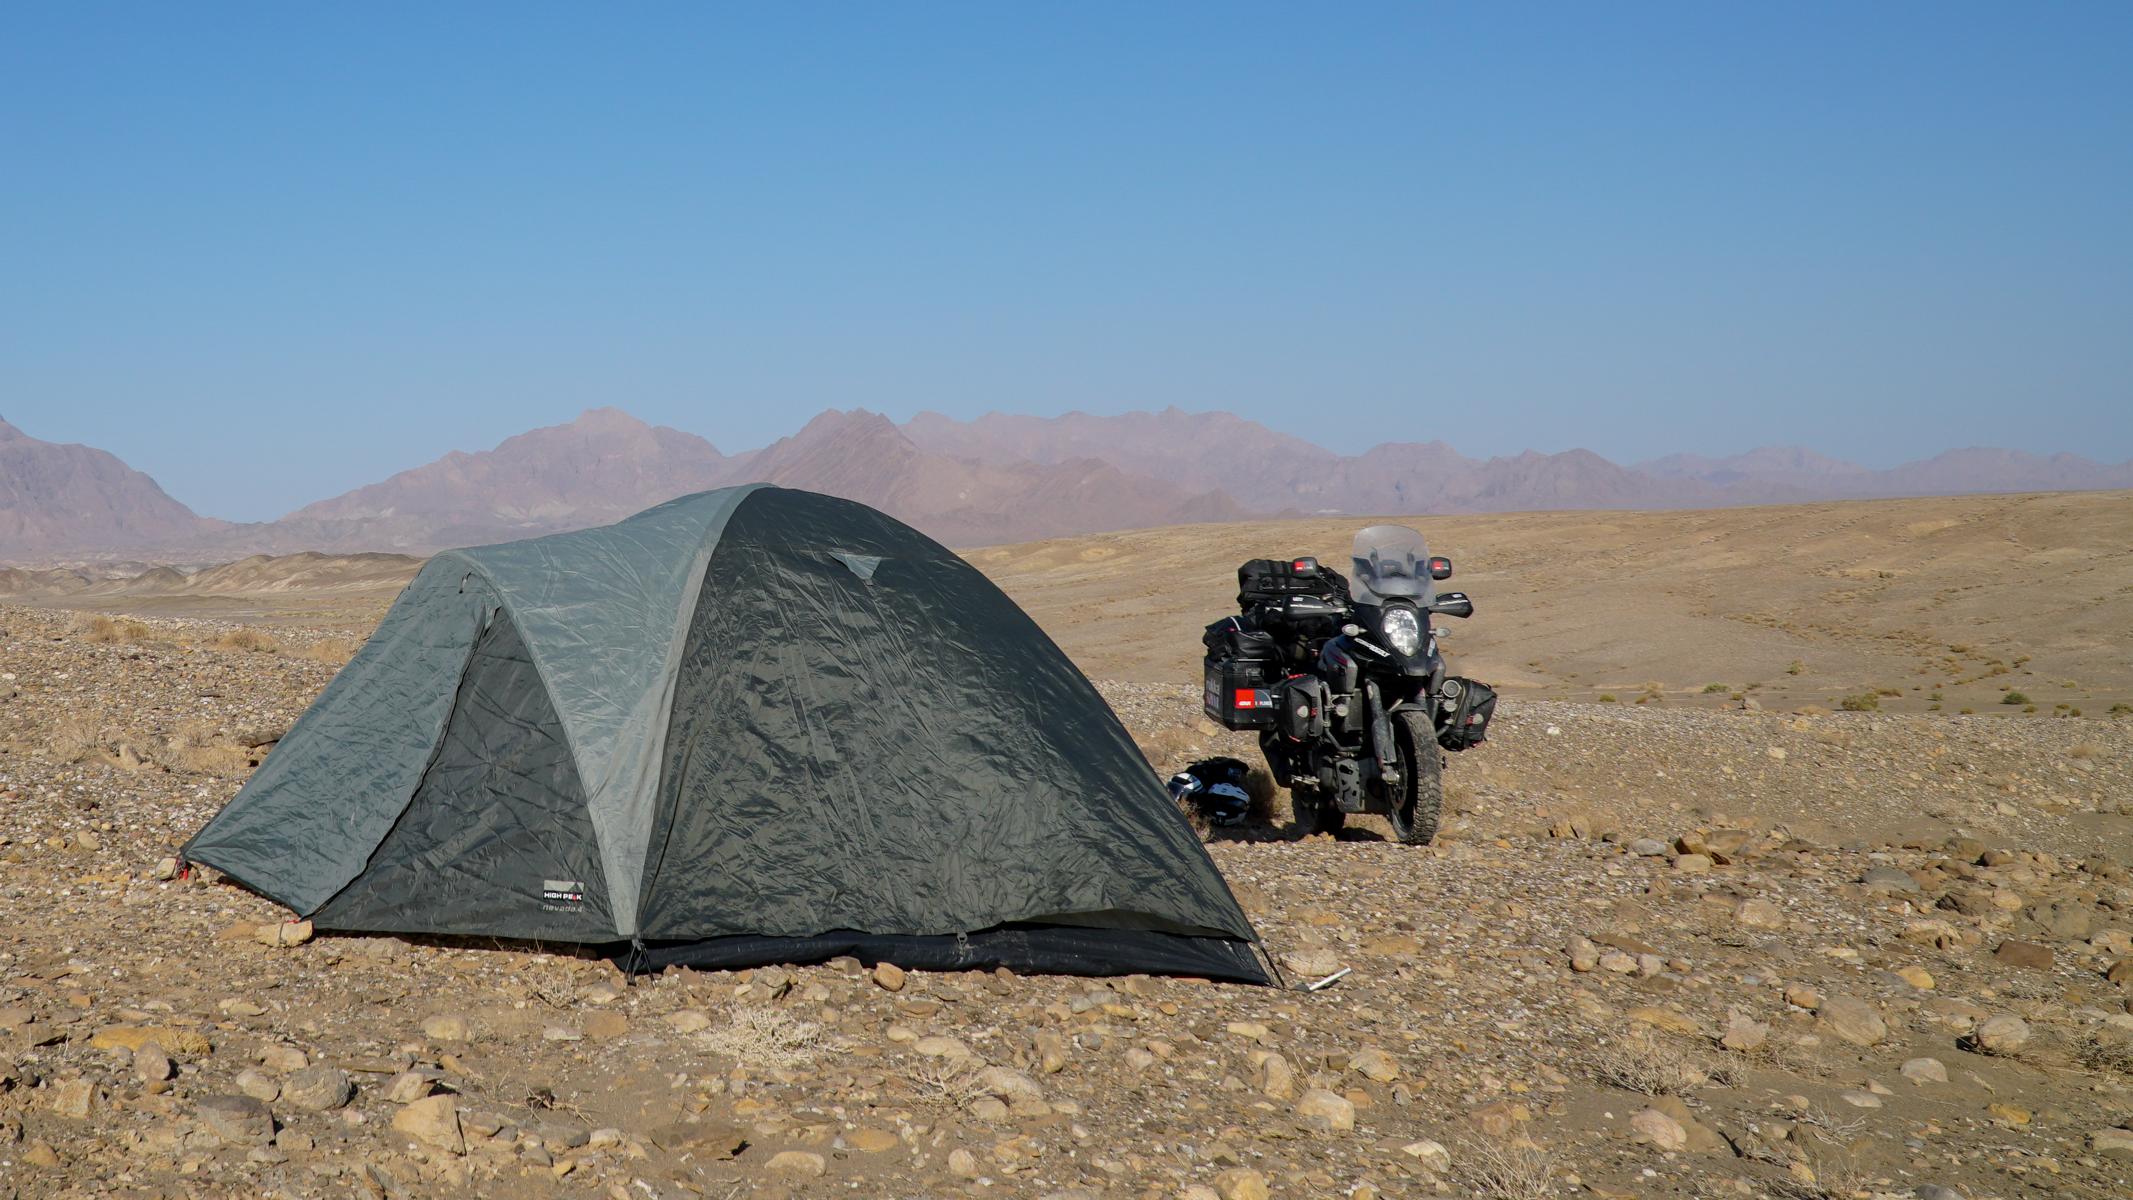 The Nevada 4 tent in the Iranian desert